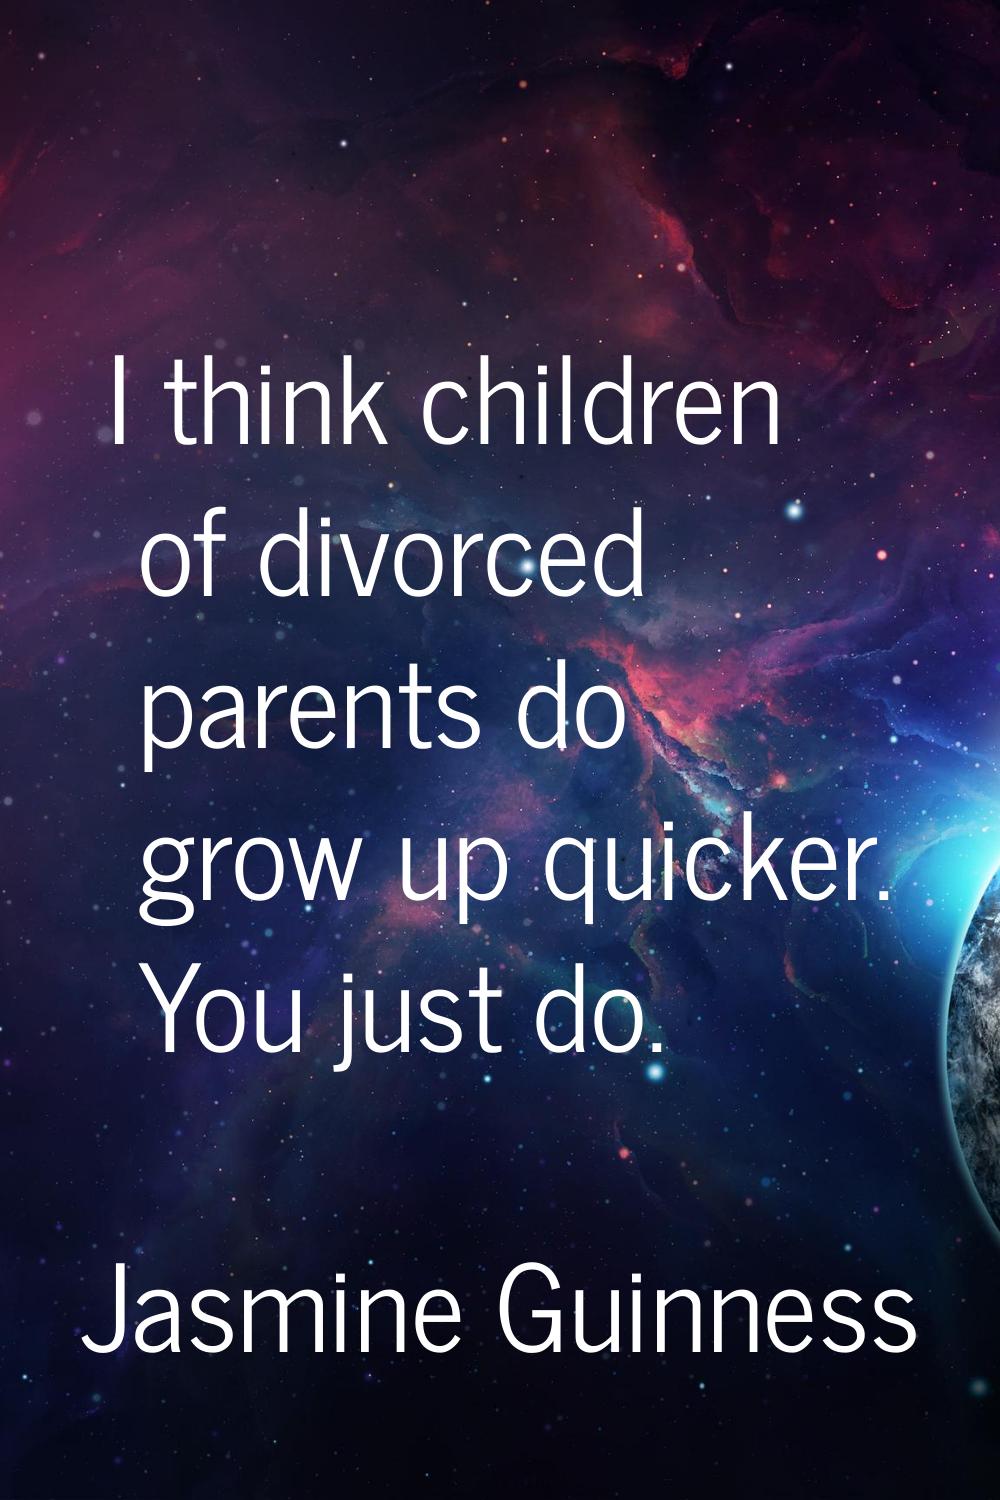 I think children of divorced parents do grow up quicker. You just do.